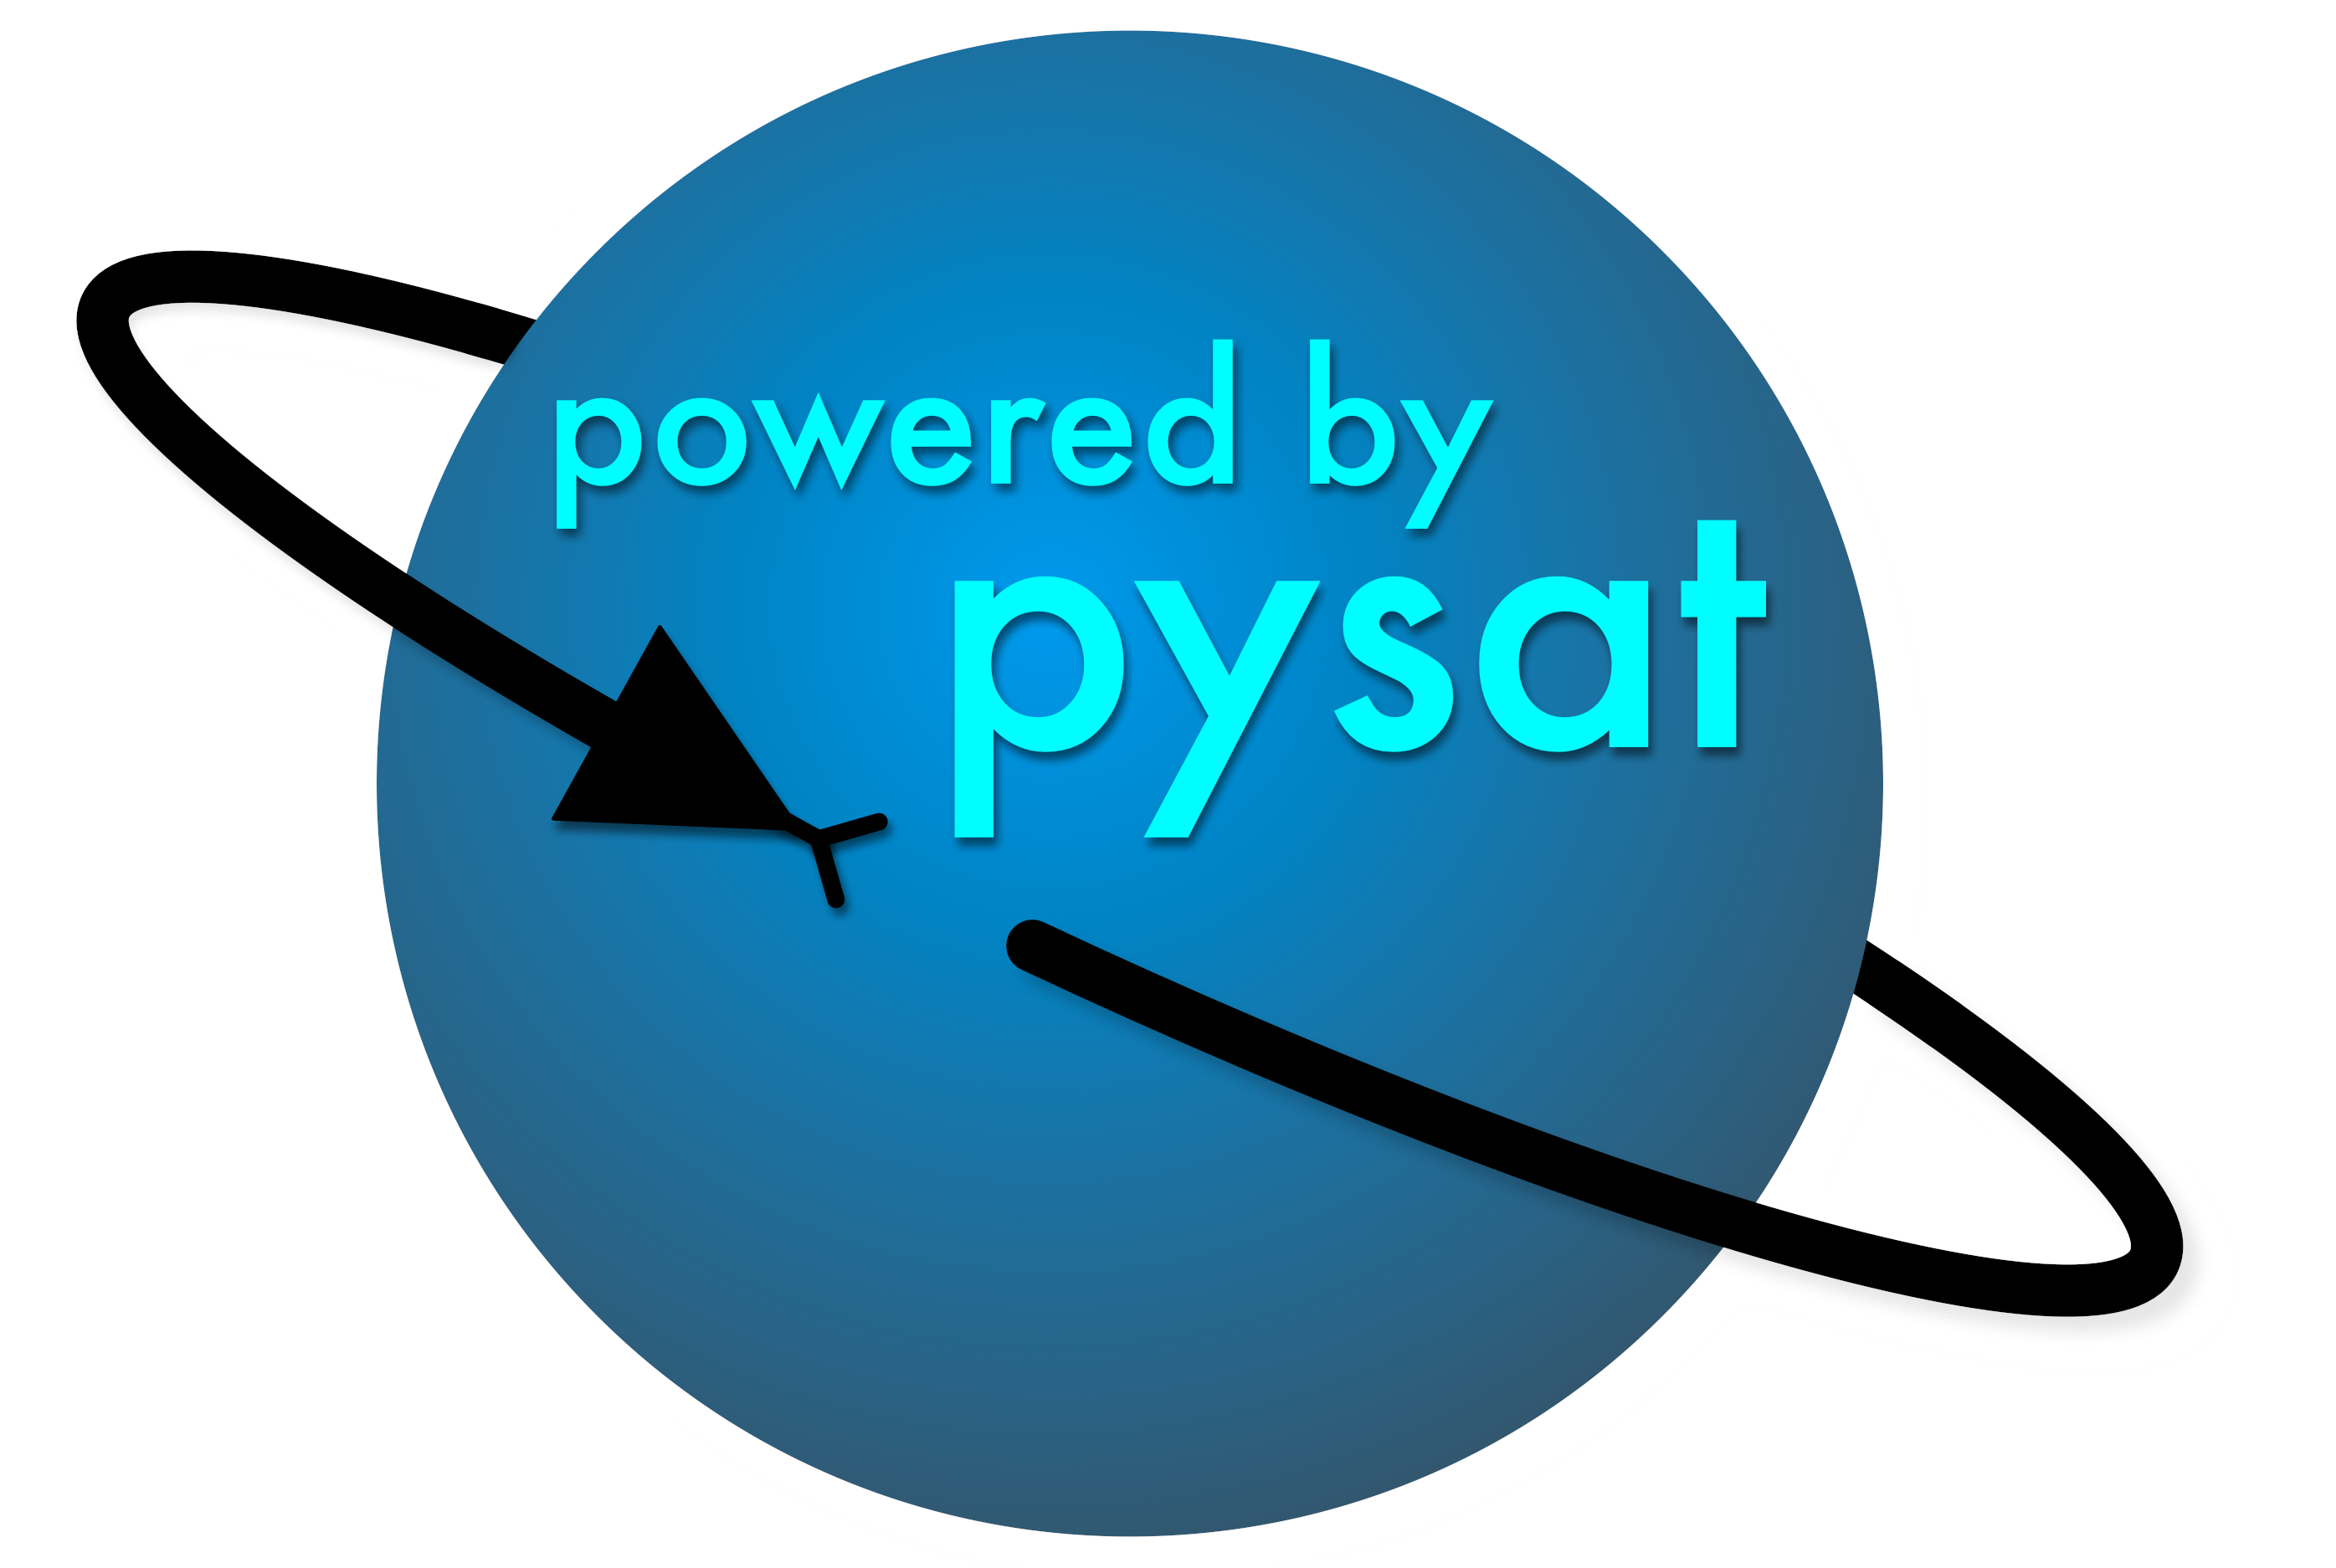 _images/poweredbypysat.png